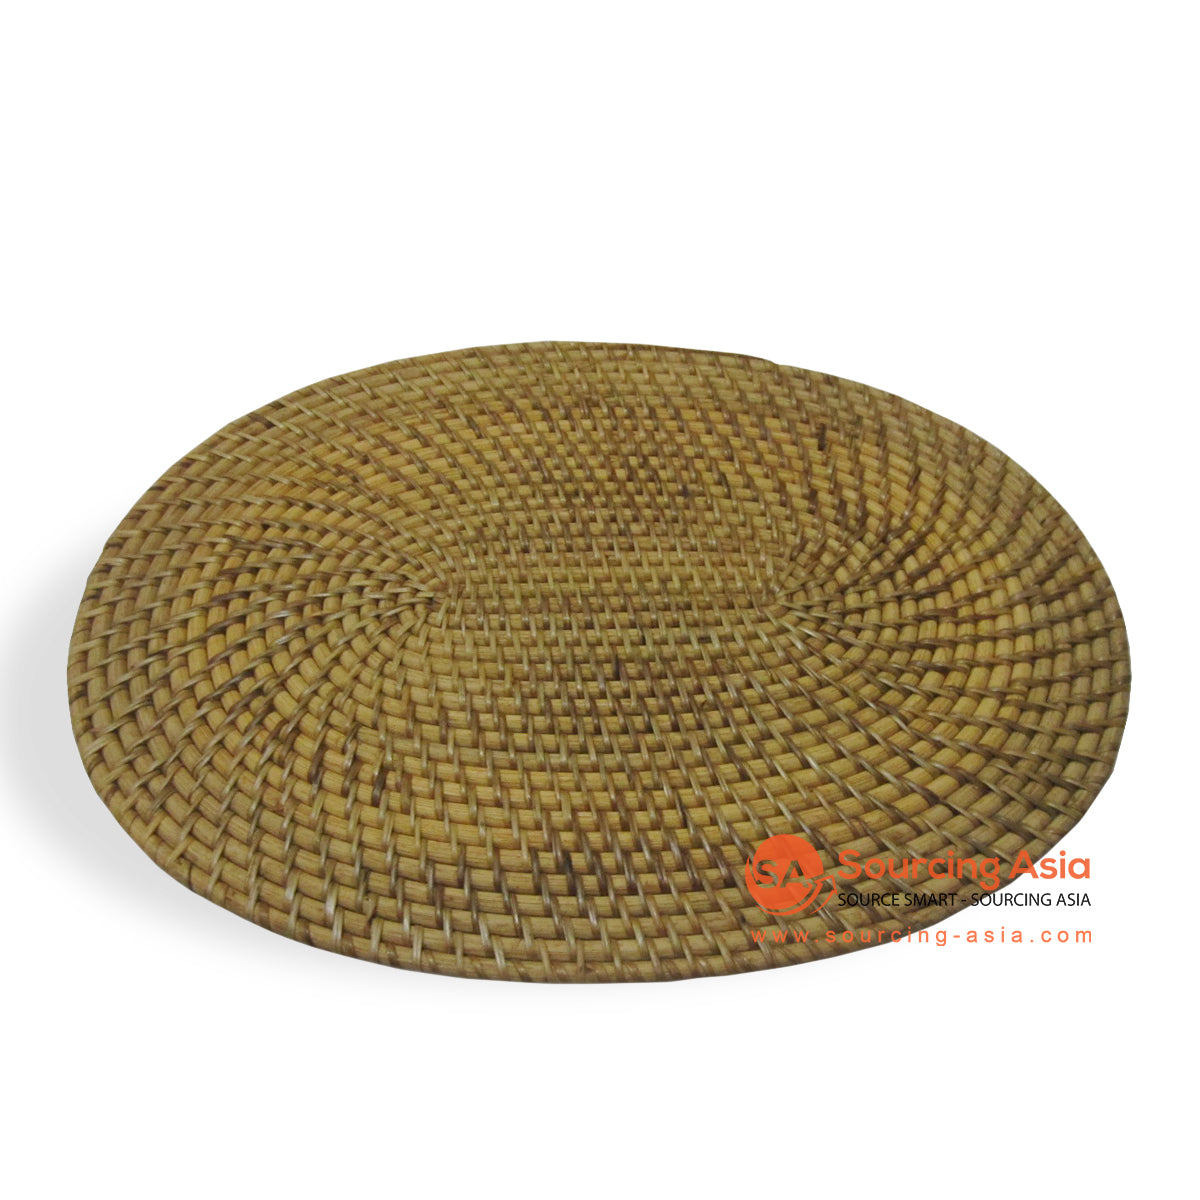 ALI006O40-NA NATURAL OVAL RATTAN PLACEMAT